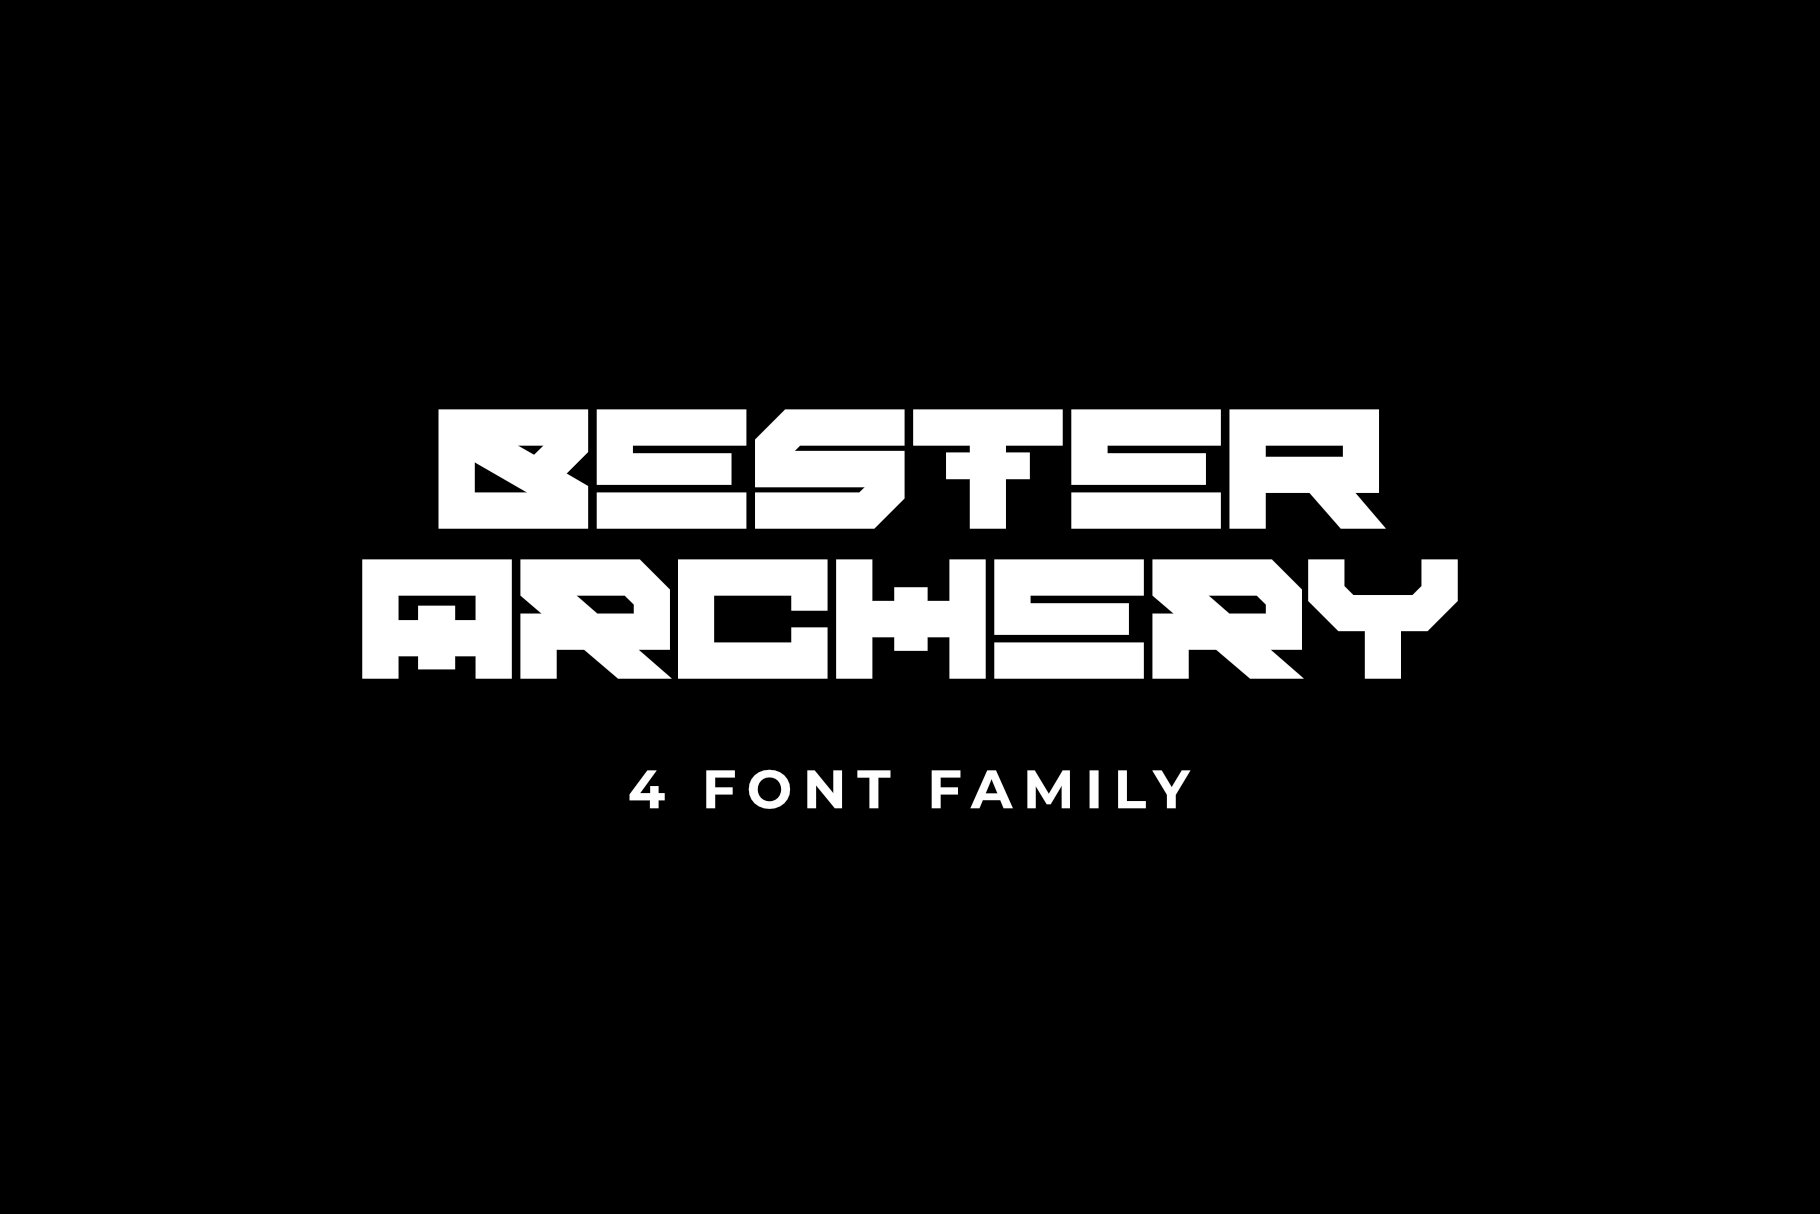 BESTER ARCHERY FONT FAMILY cover image.